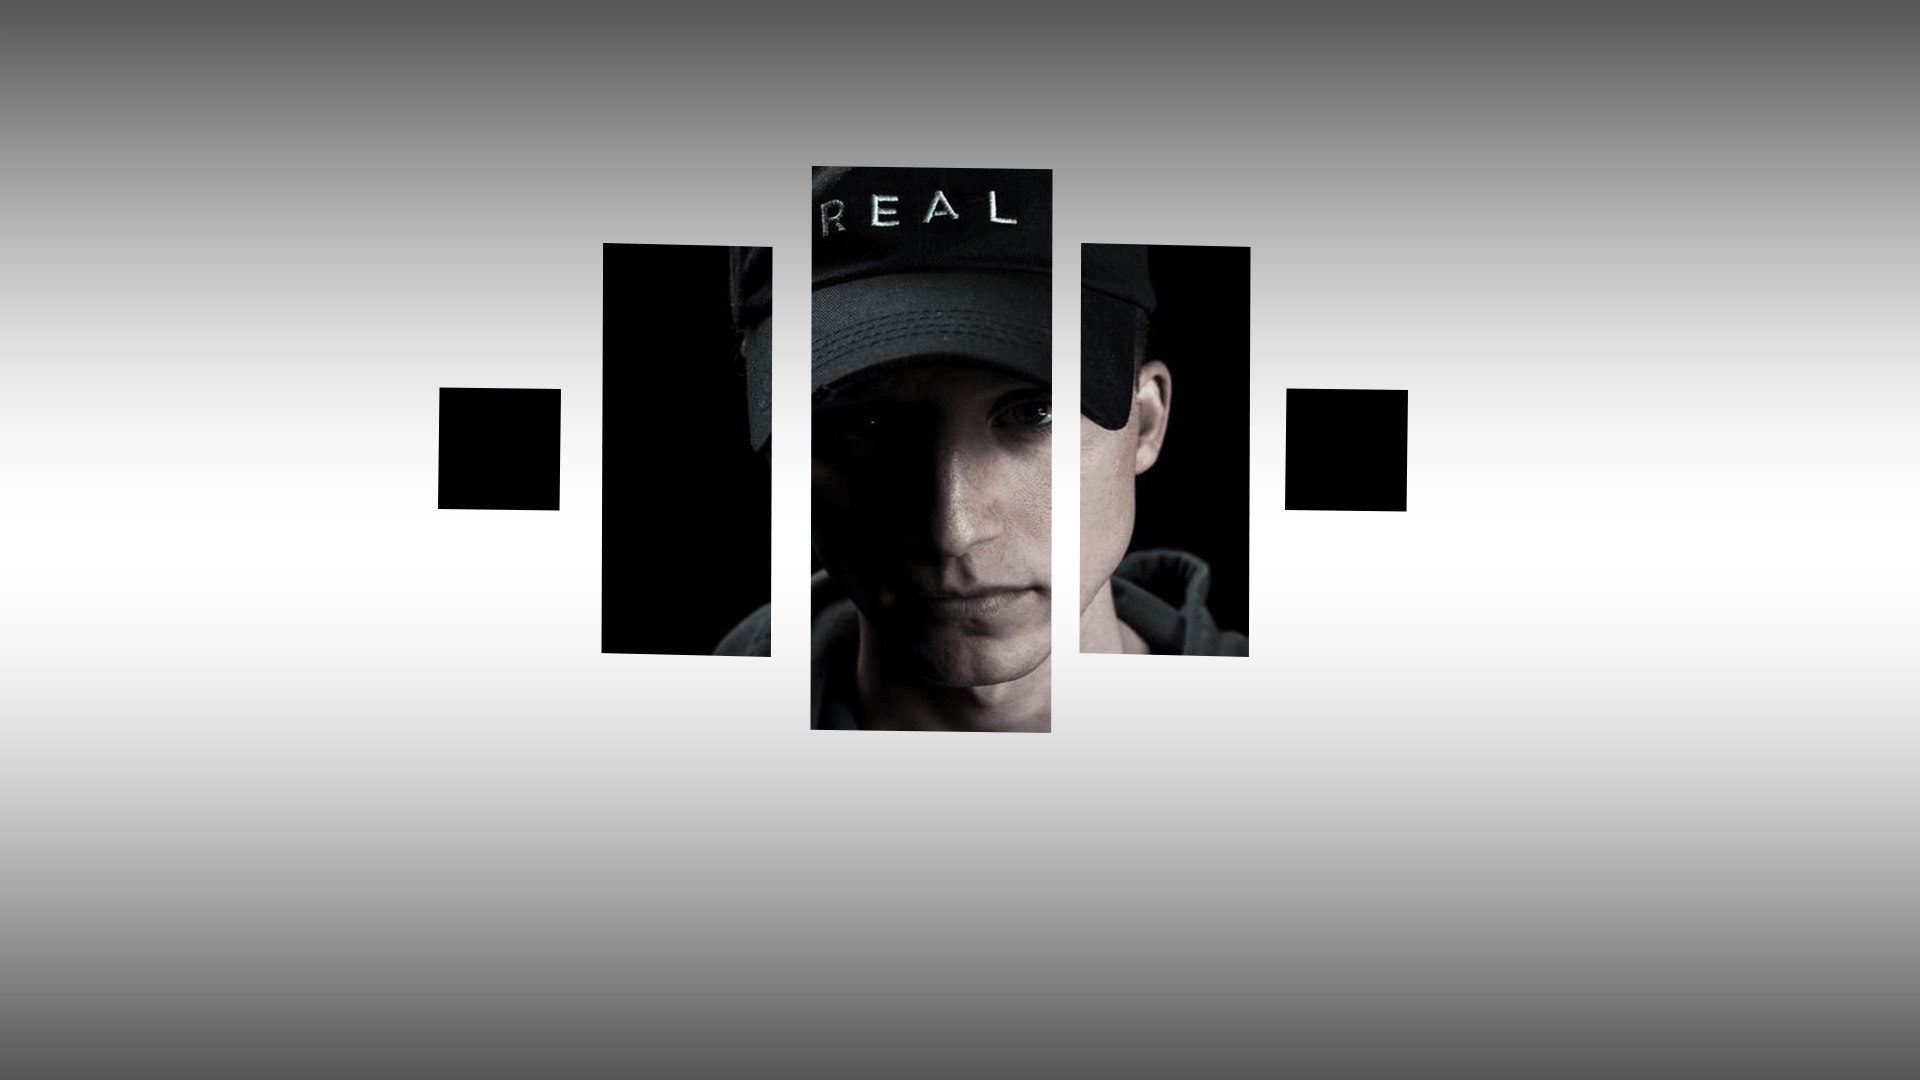 Nf wallpaper  Nf real music Music wallpaper Nf real